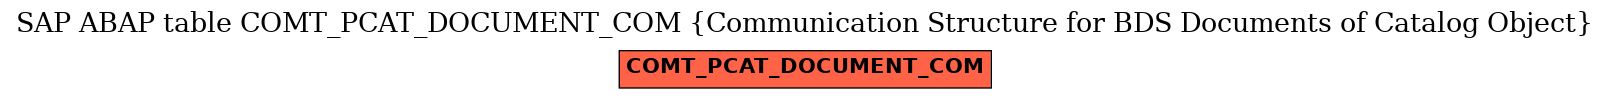 E-R Diagram for table COMT_PCAT_DOCUMENT_COM (Communication Structure for BDS Documents of Catalog Object)